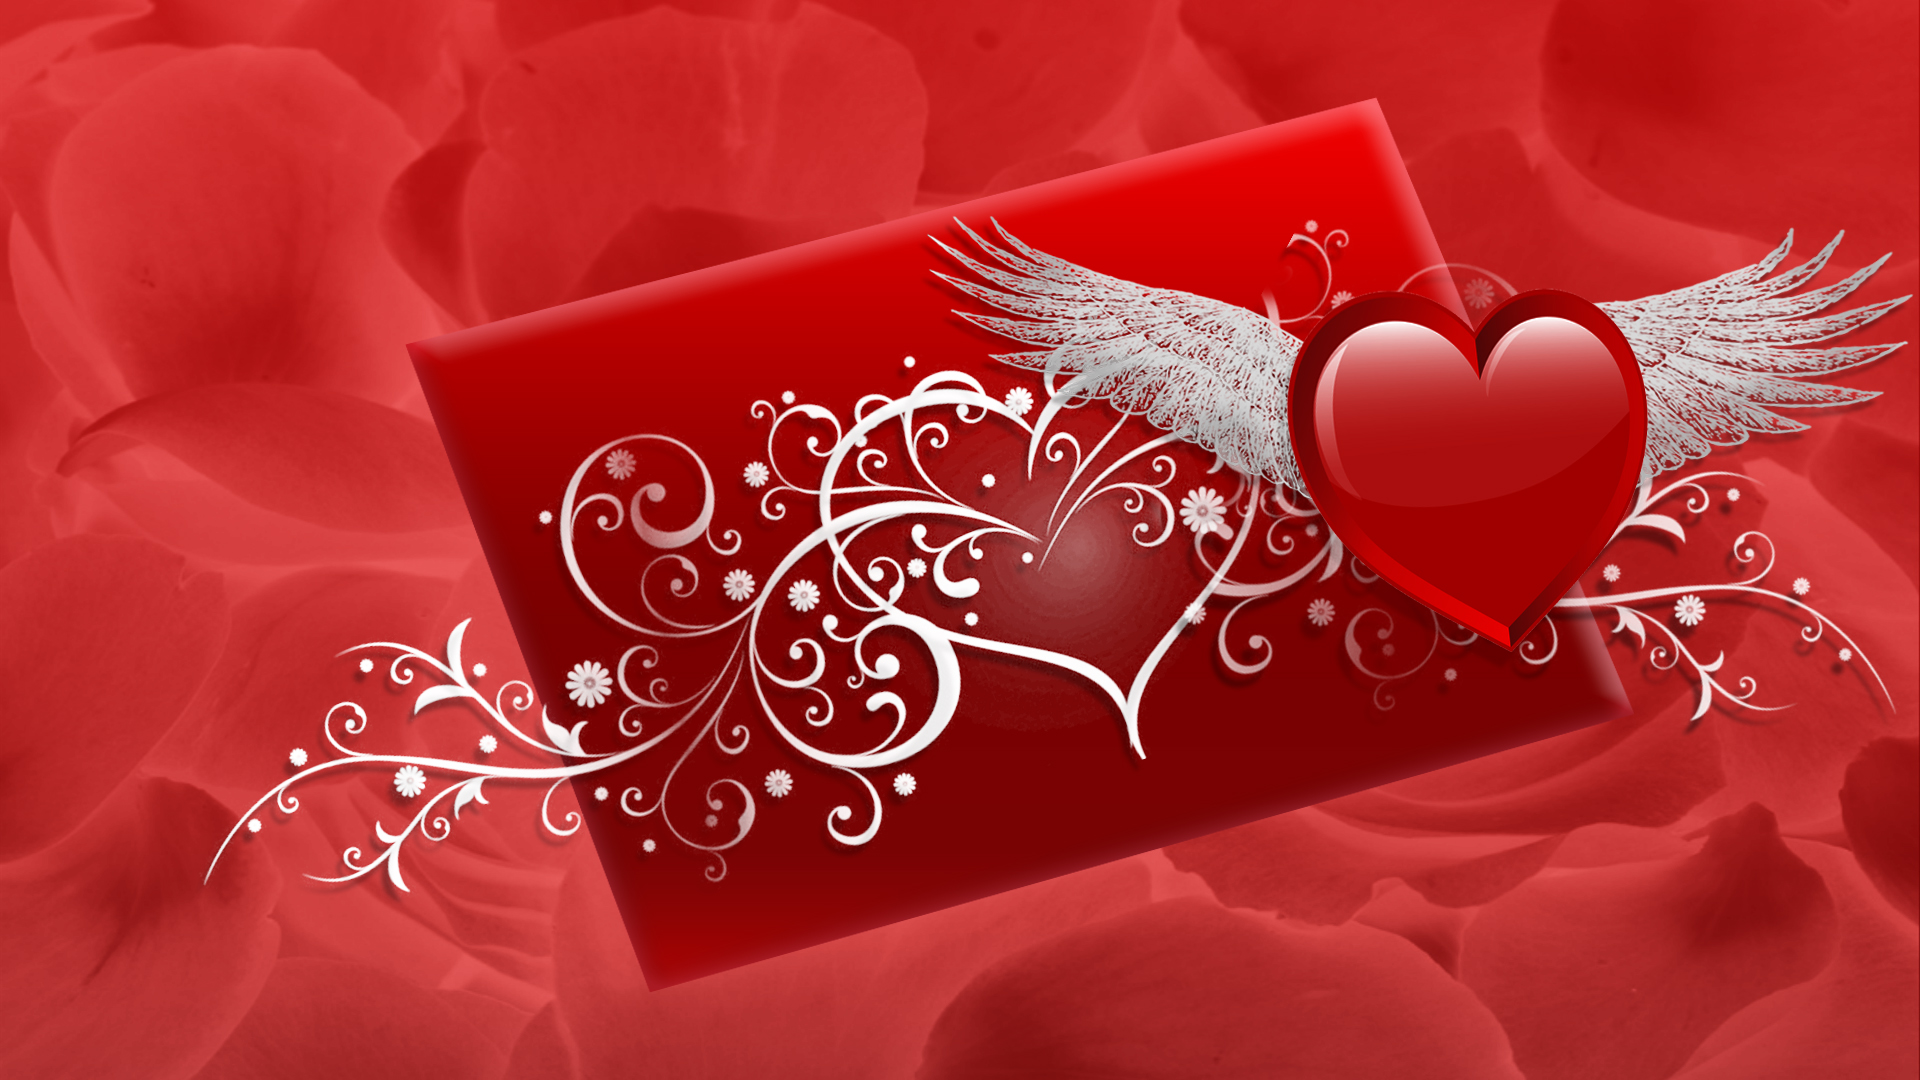 Wallpaper Valentine Background Free / If you're looking for the best v...